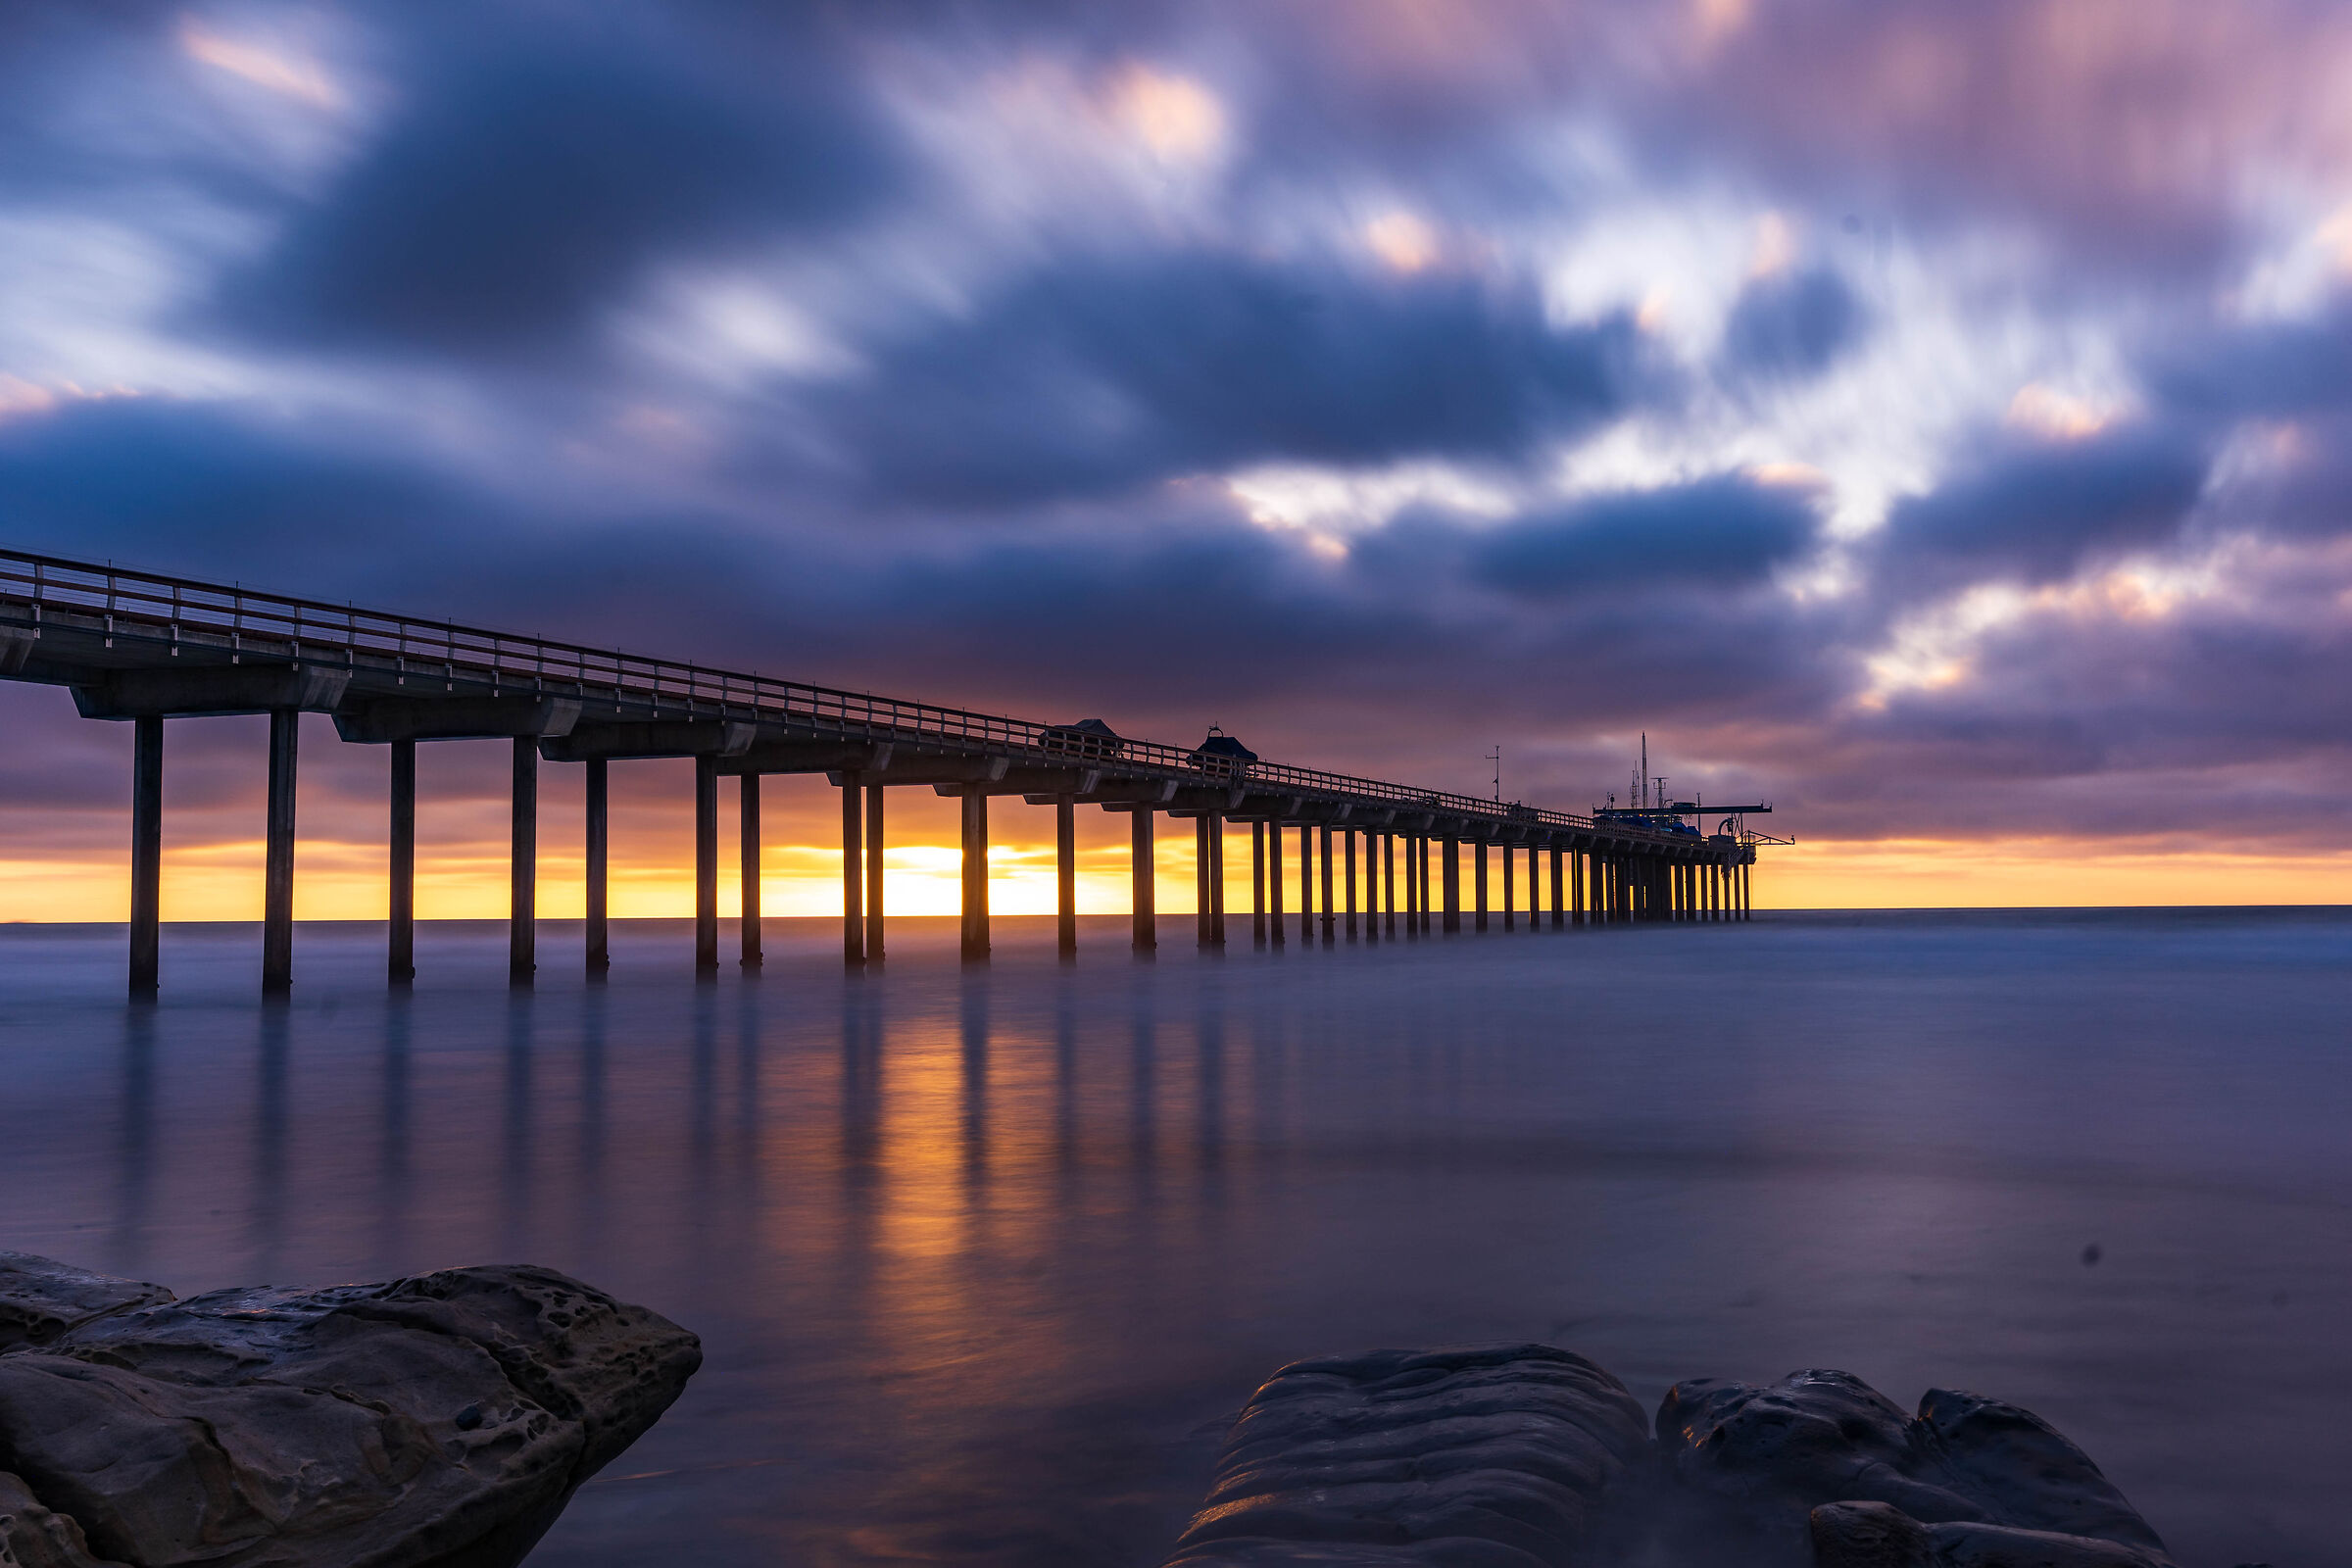 A lonely pier at sunset...